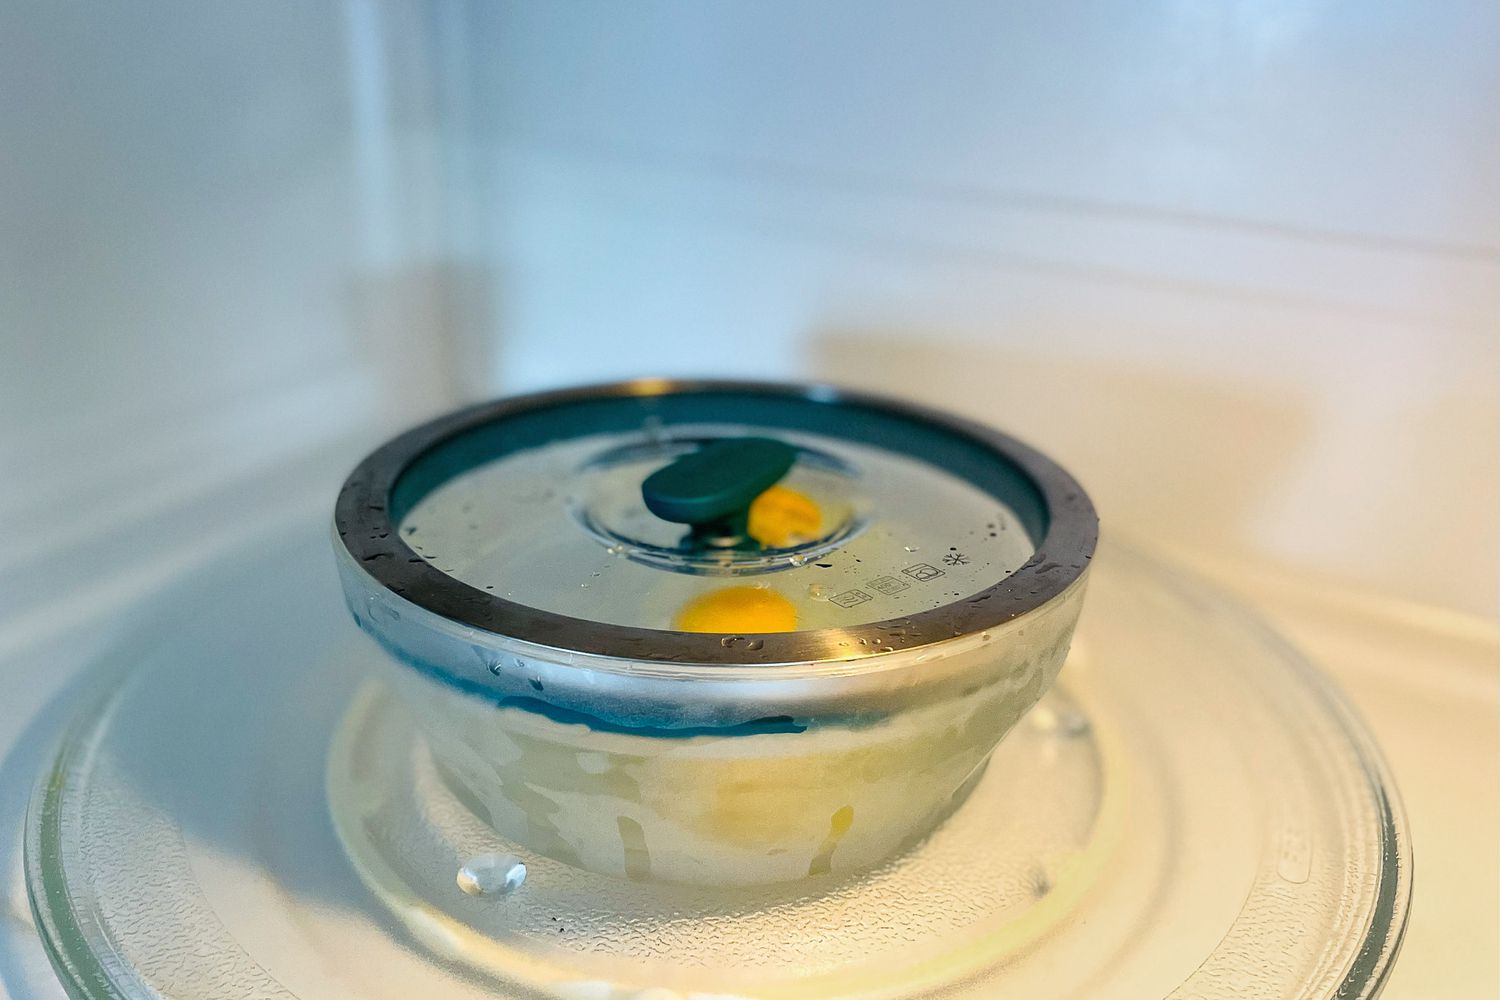 An Anyday dish in the microwave with its lid on